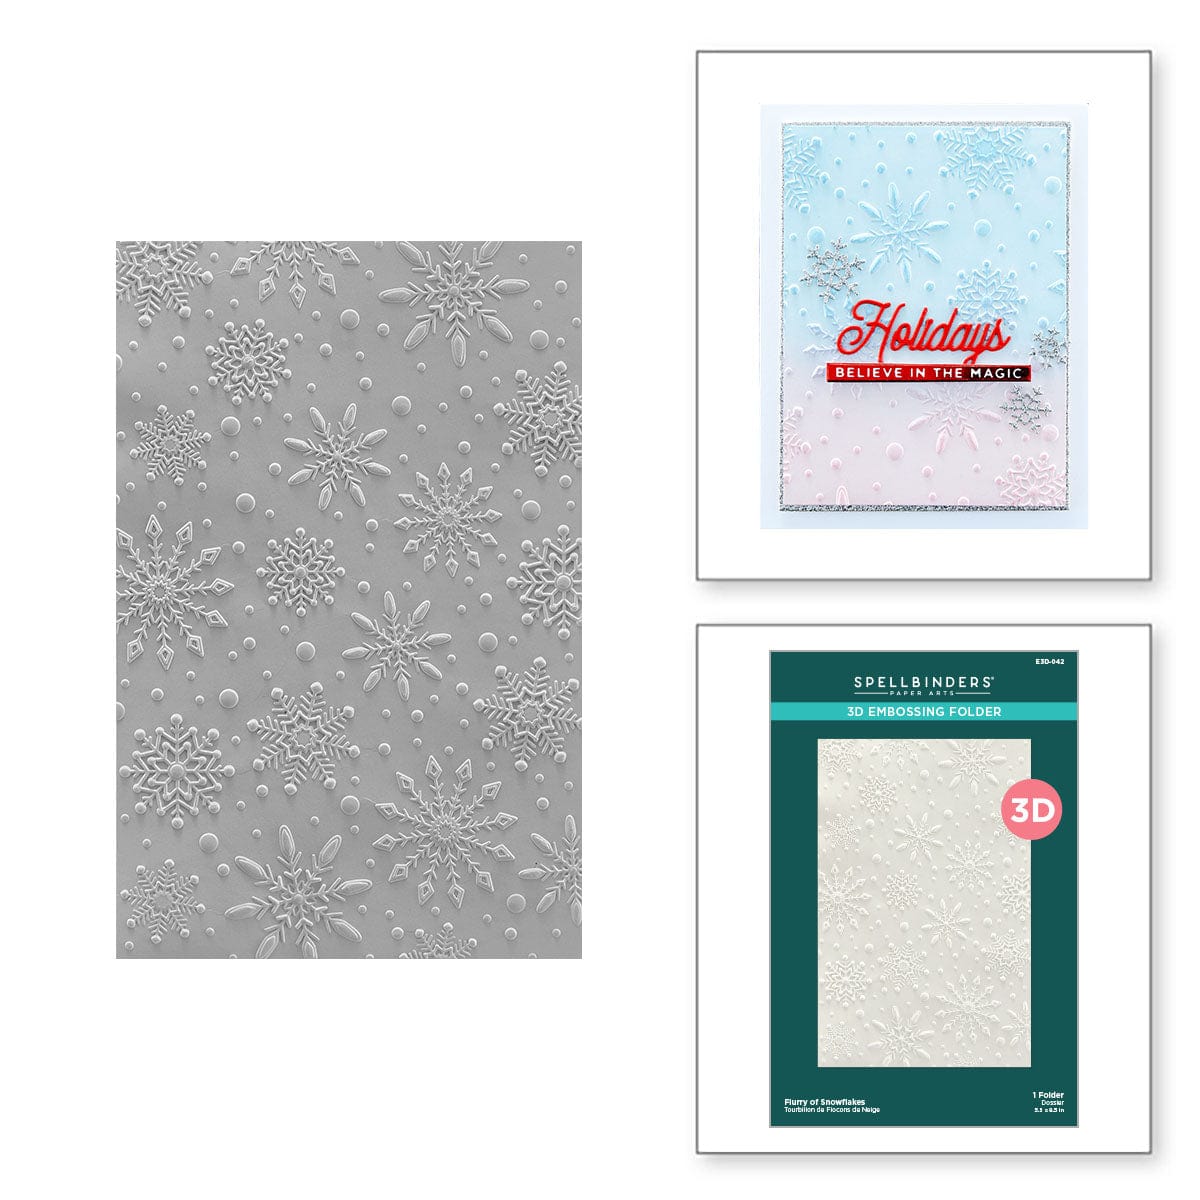 Flurry of Snowflakes 3D Embossing Folder from the Christmas Collection